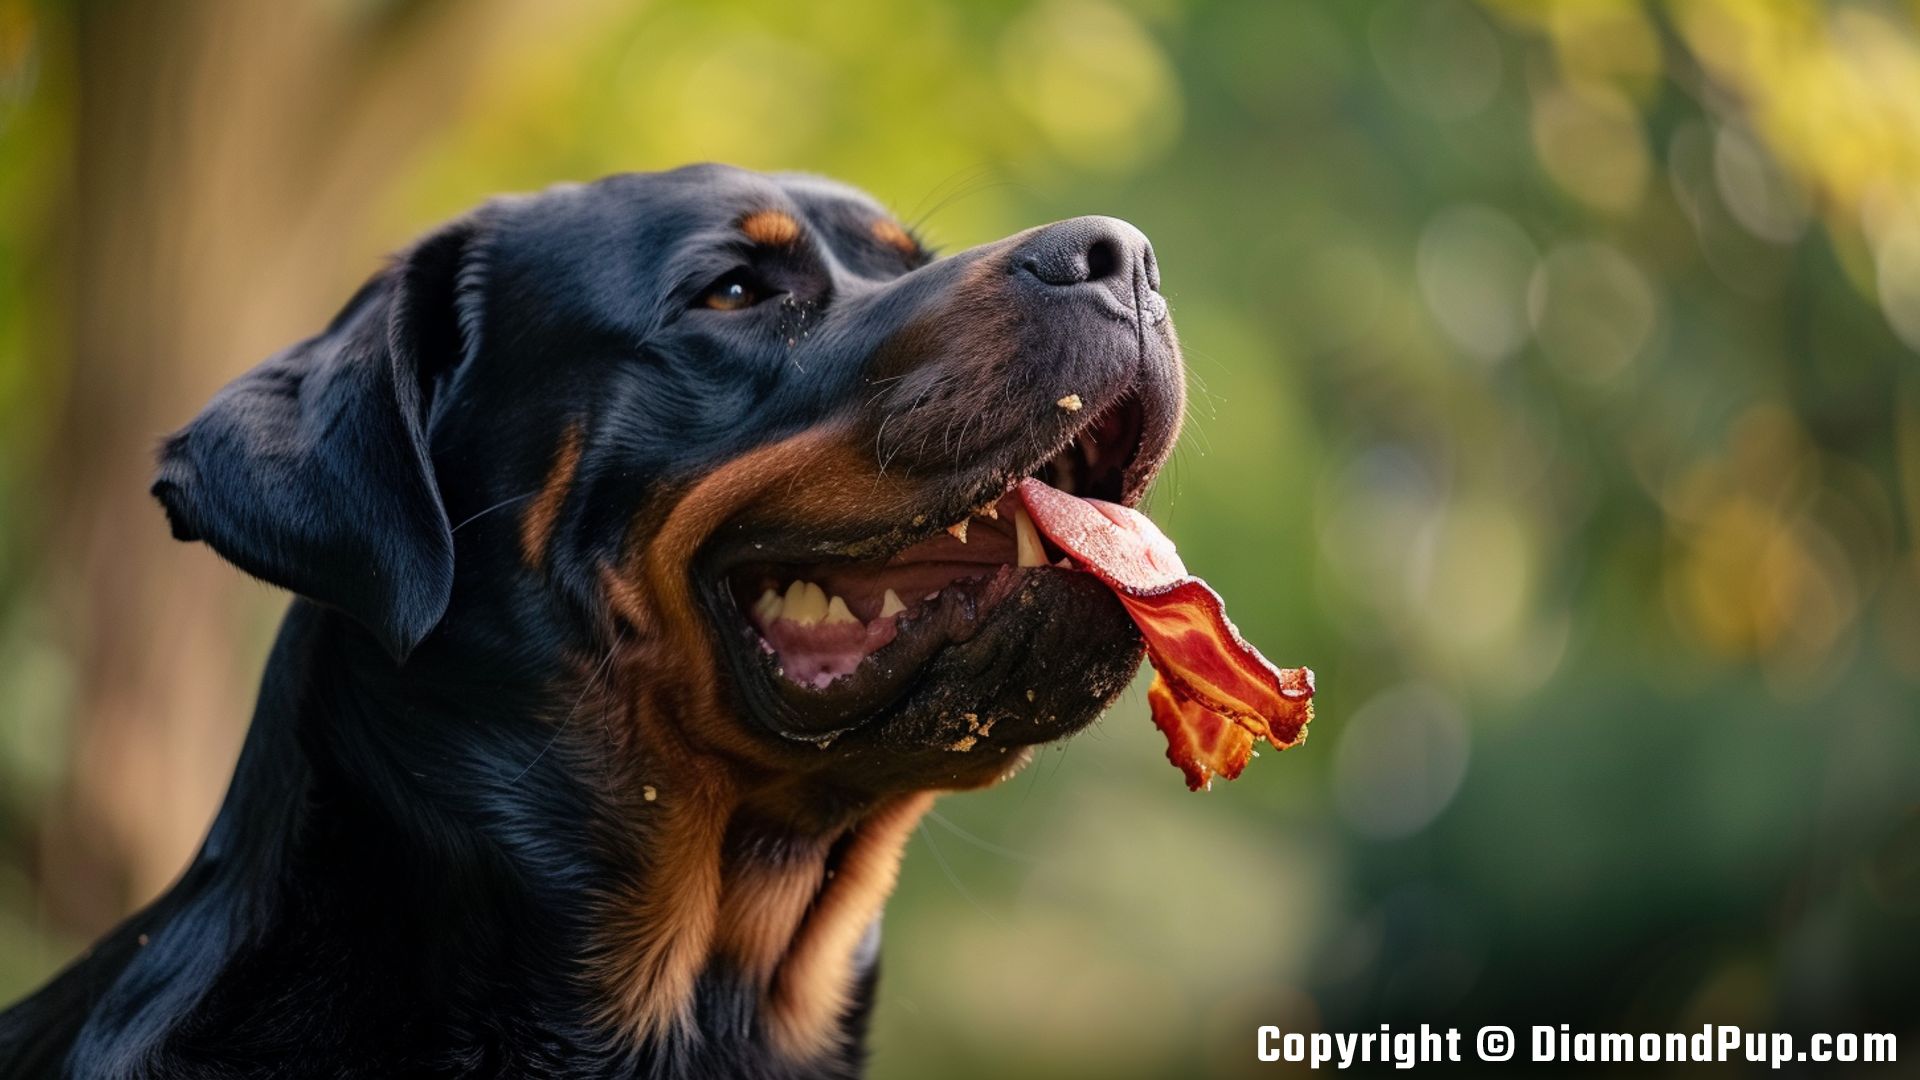 Image of Rottweiler Eating Bacon